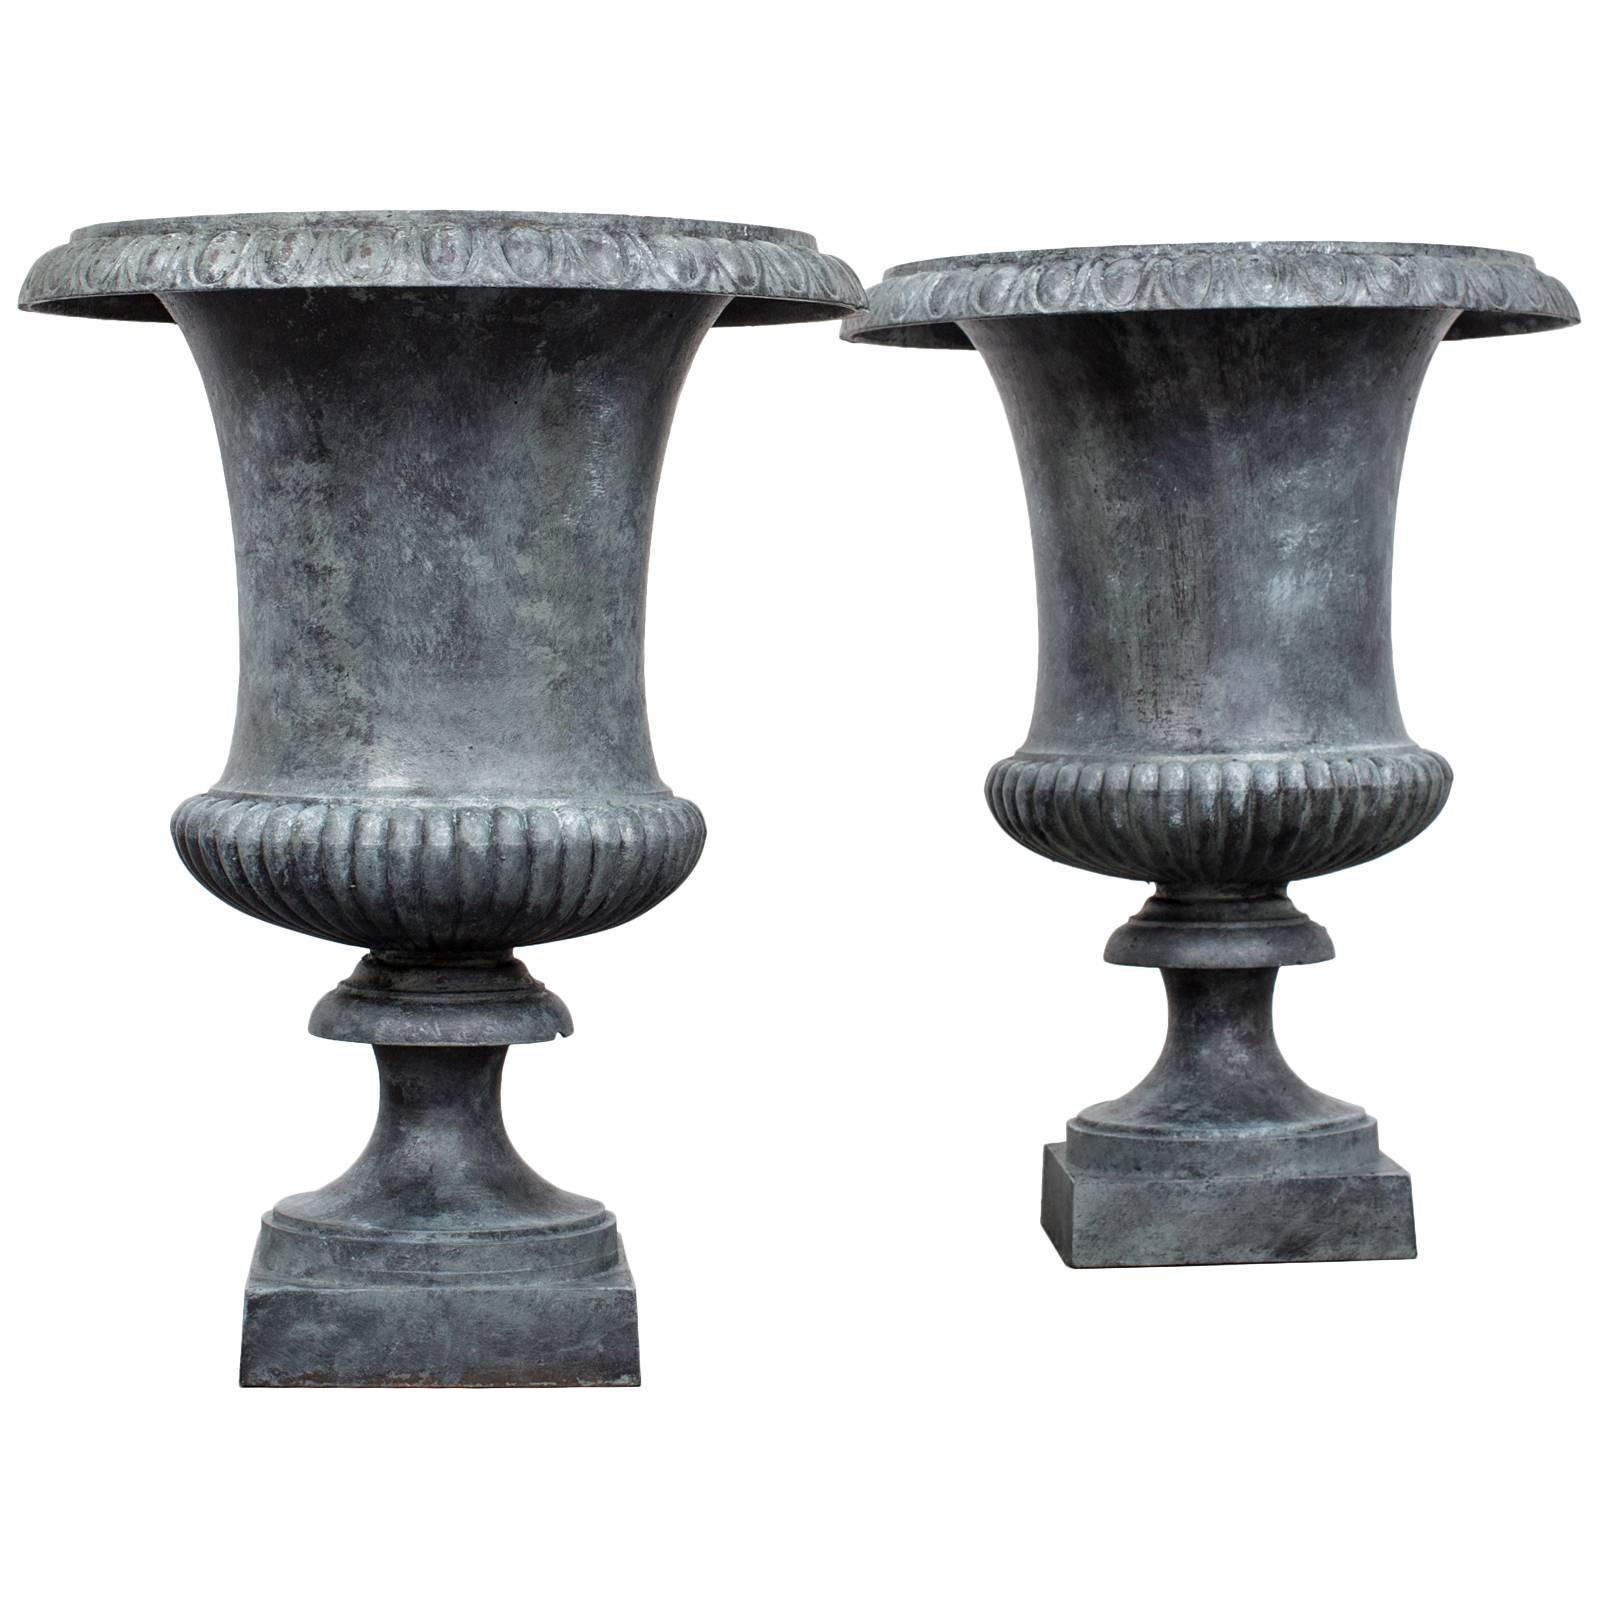 Pair of Cast Iron Urns Neoclassical, 19th Century, France